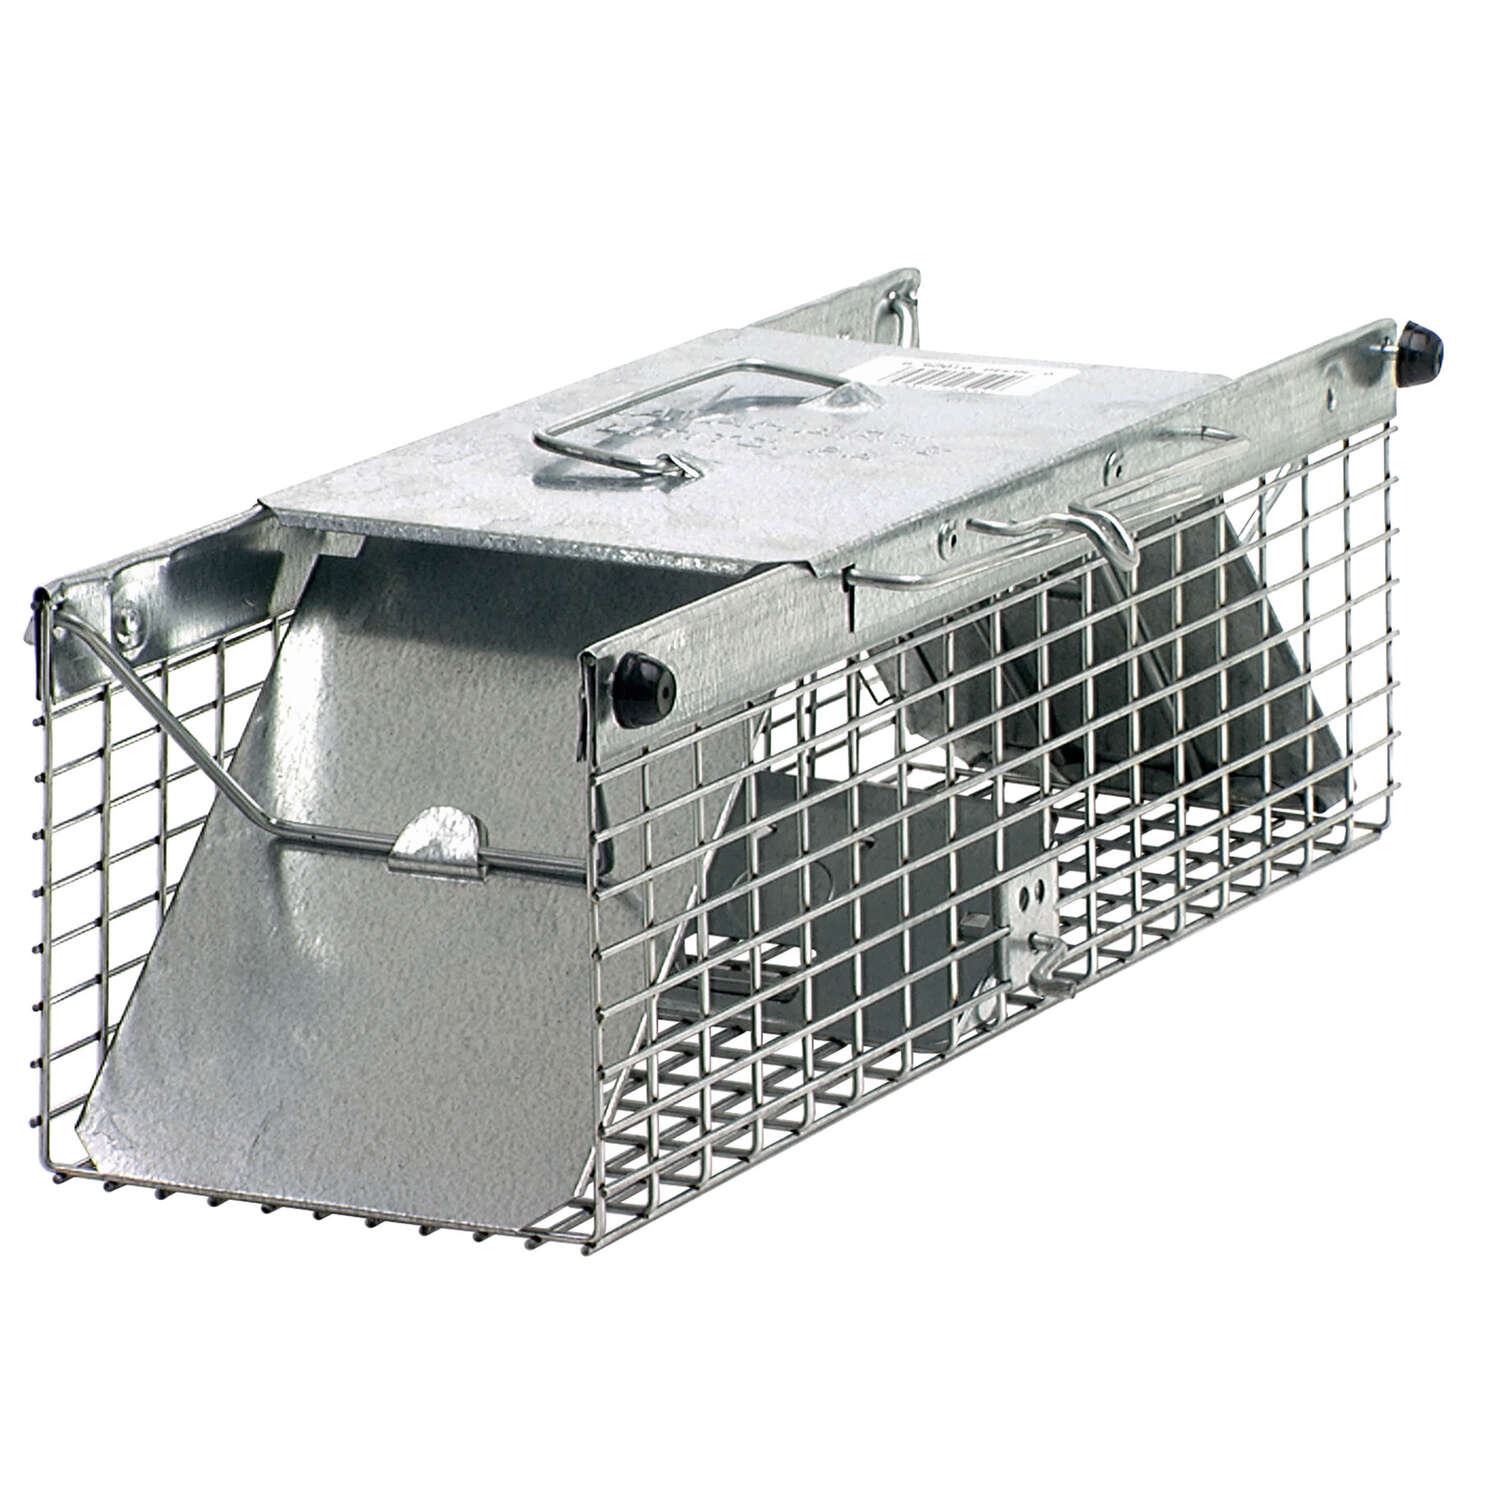 Havahart Small Live Catch Cage Trap 1 pk - Ace Hardware